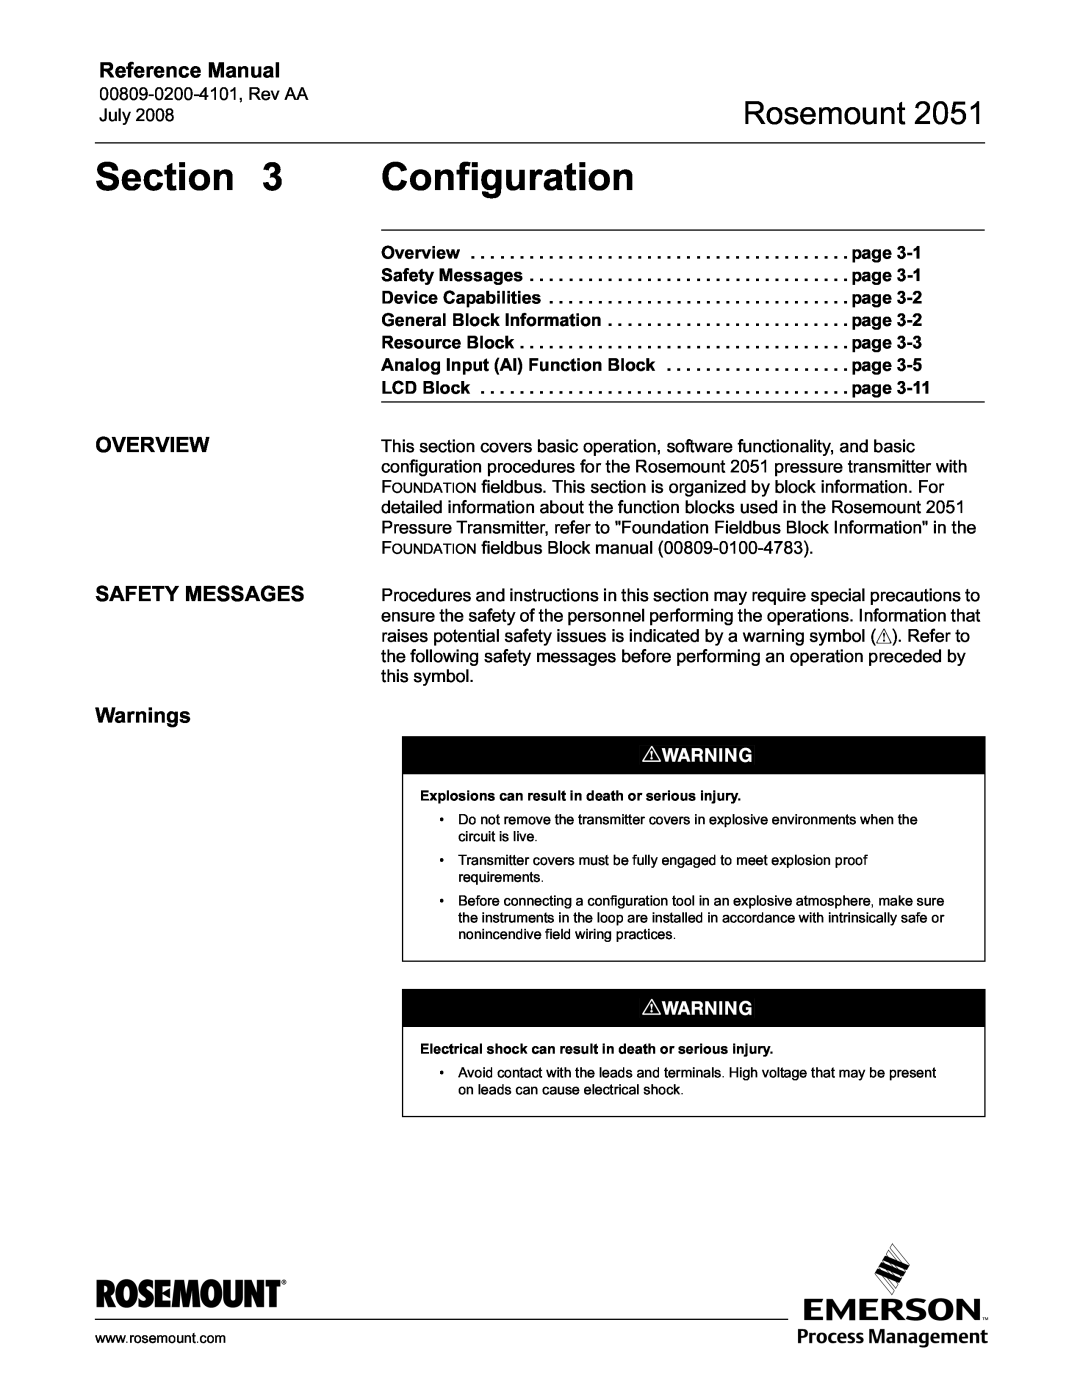 Emerson Process Management 2051 Configuration, Section, Rosemount, Reference Manual, OVERVIEW SAFETY MESSAGES Warnings 